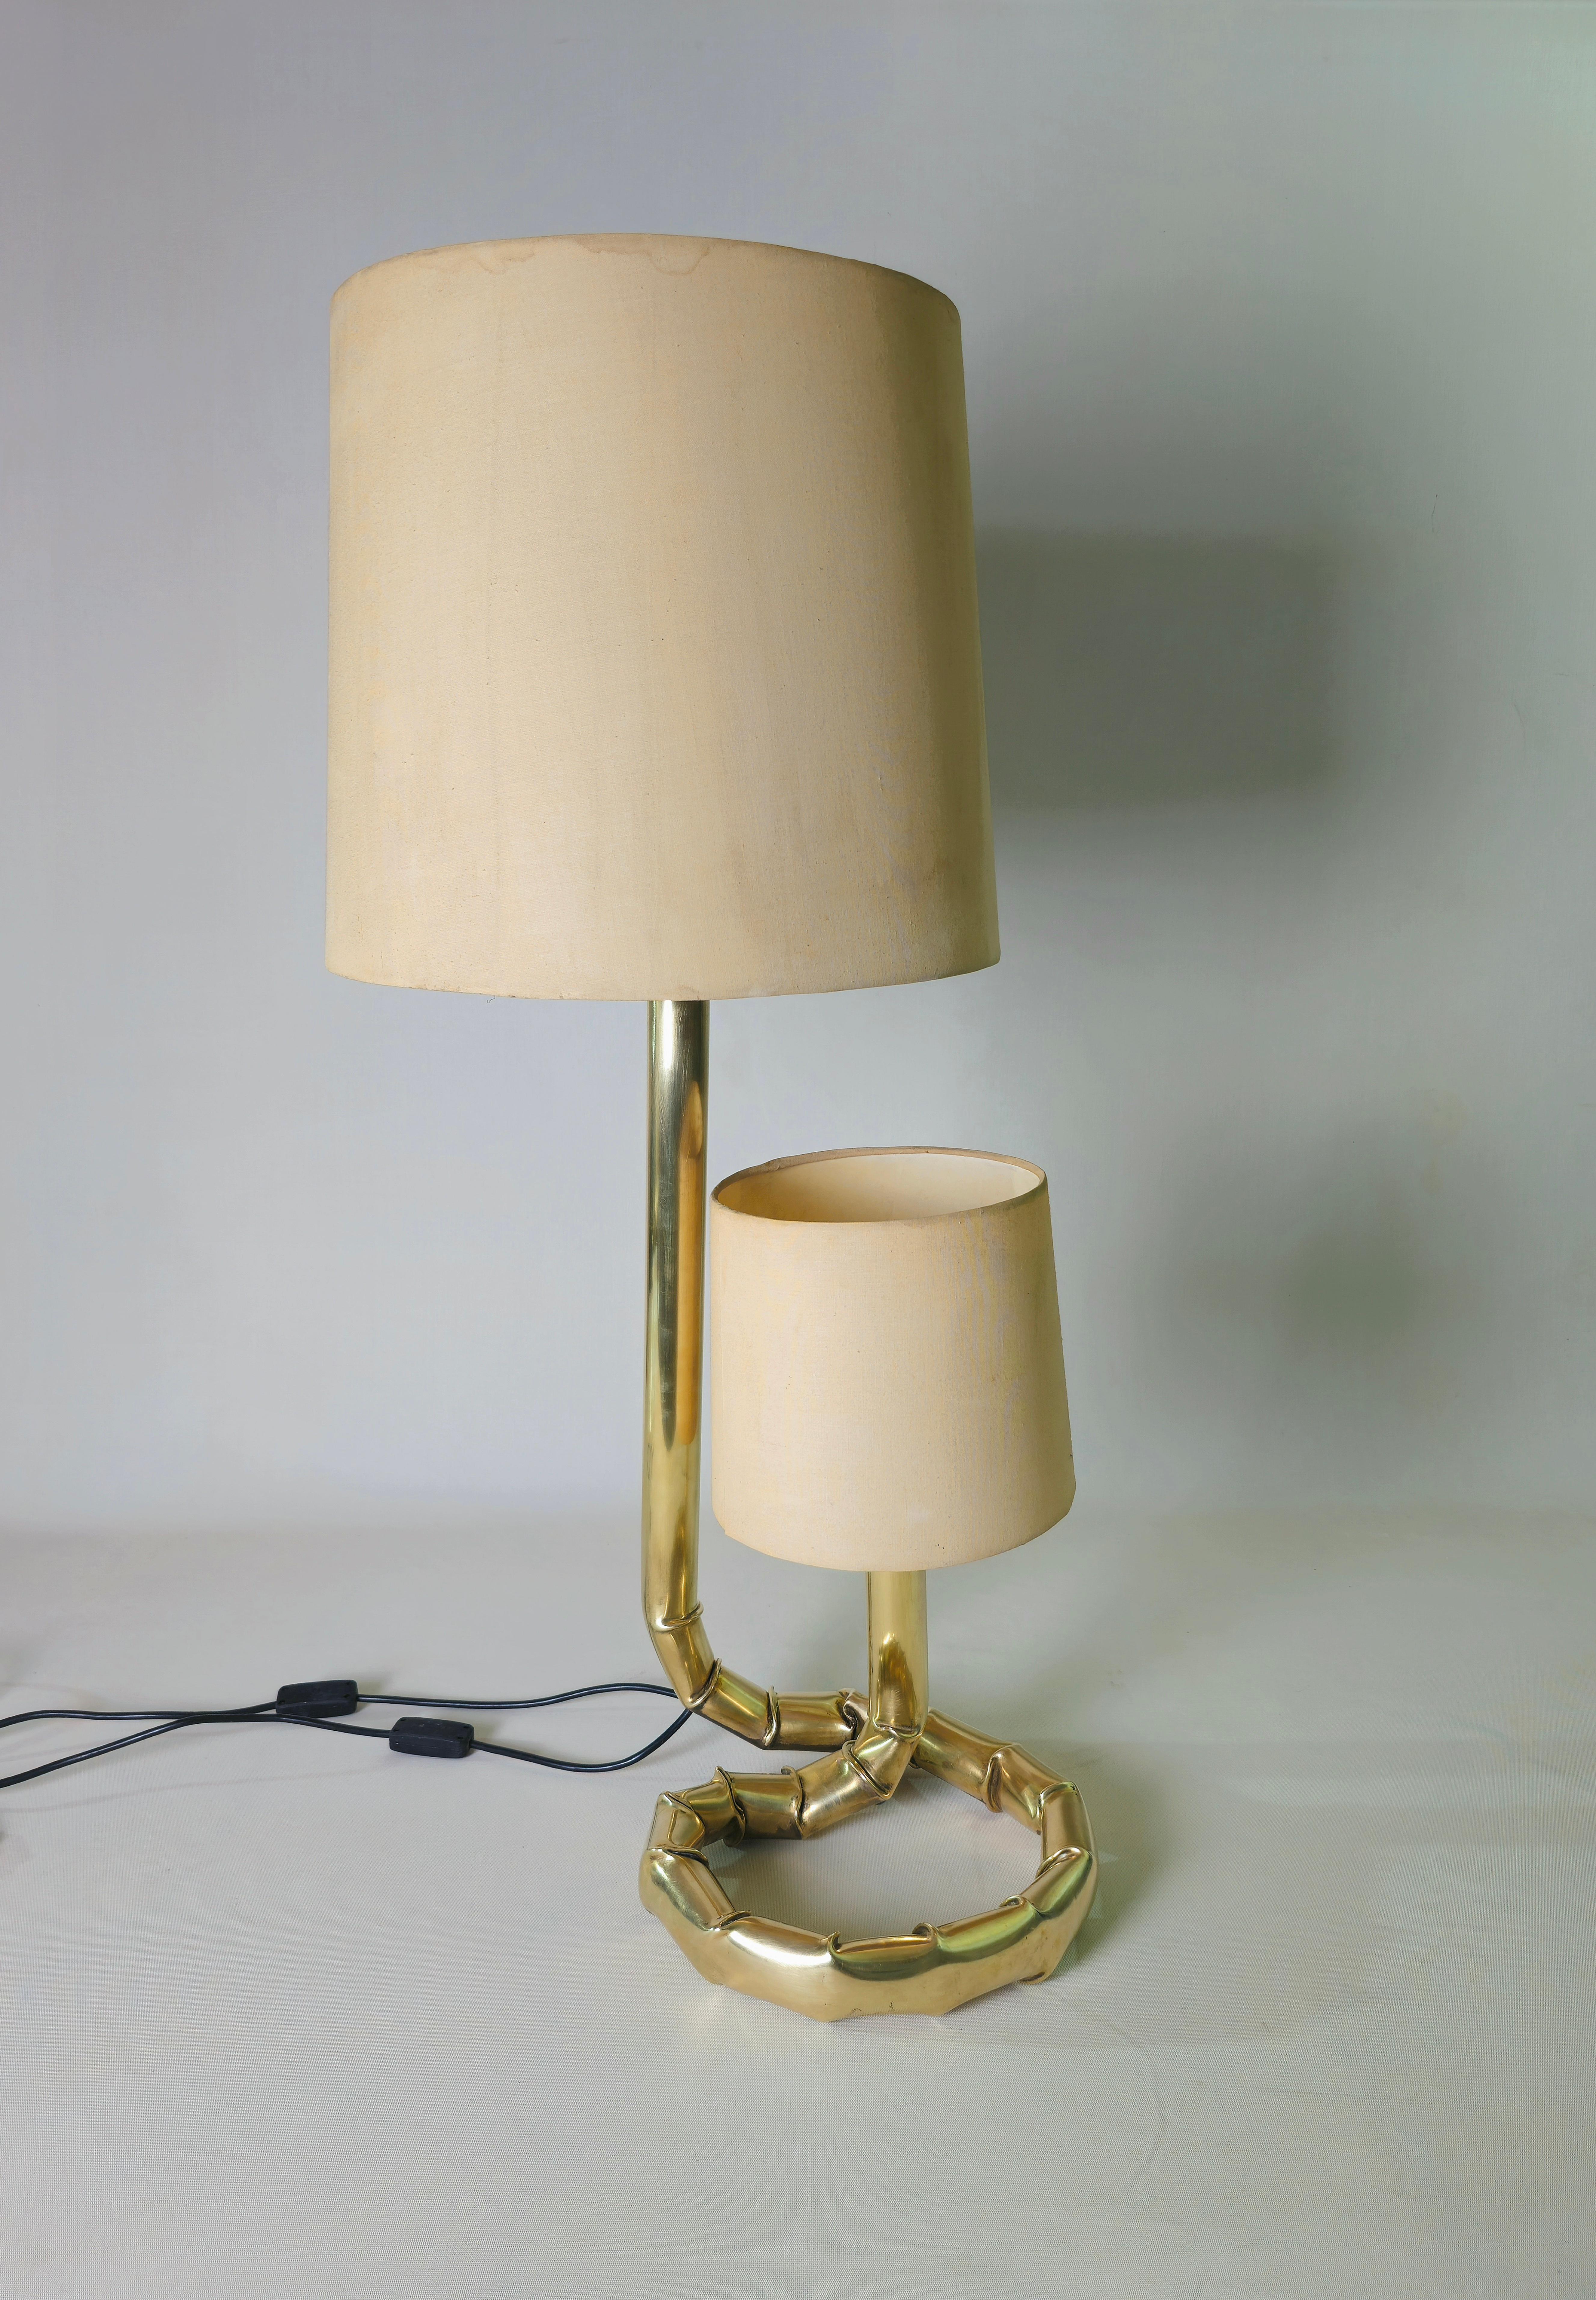 Large and particular 2-light brass table lamp produced in Italy in the 1960s. The lamp is made entirely of woven solid brass tubing with fabric lampshades. Piece of furniture suitable for any environment, lamp that does not go unnoticed. It